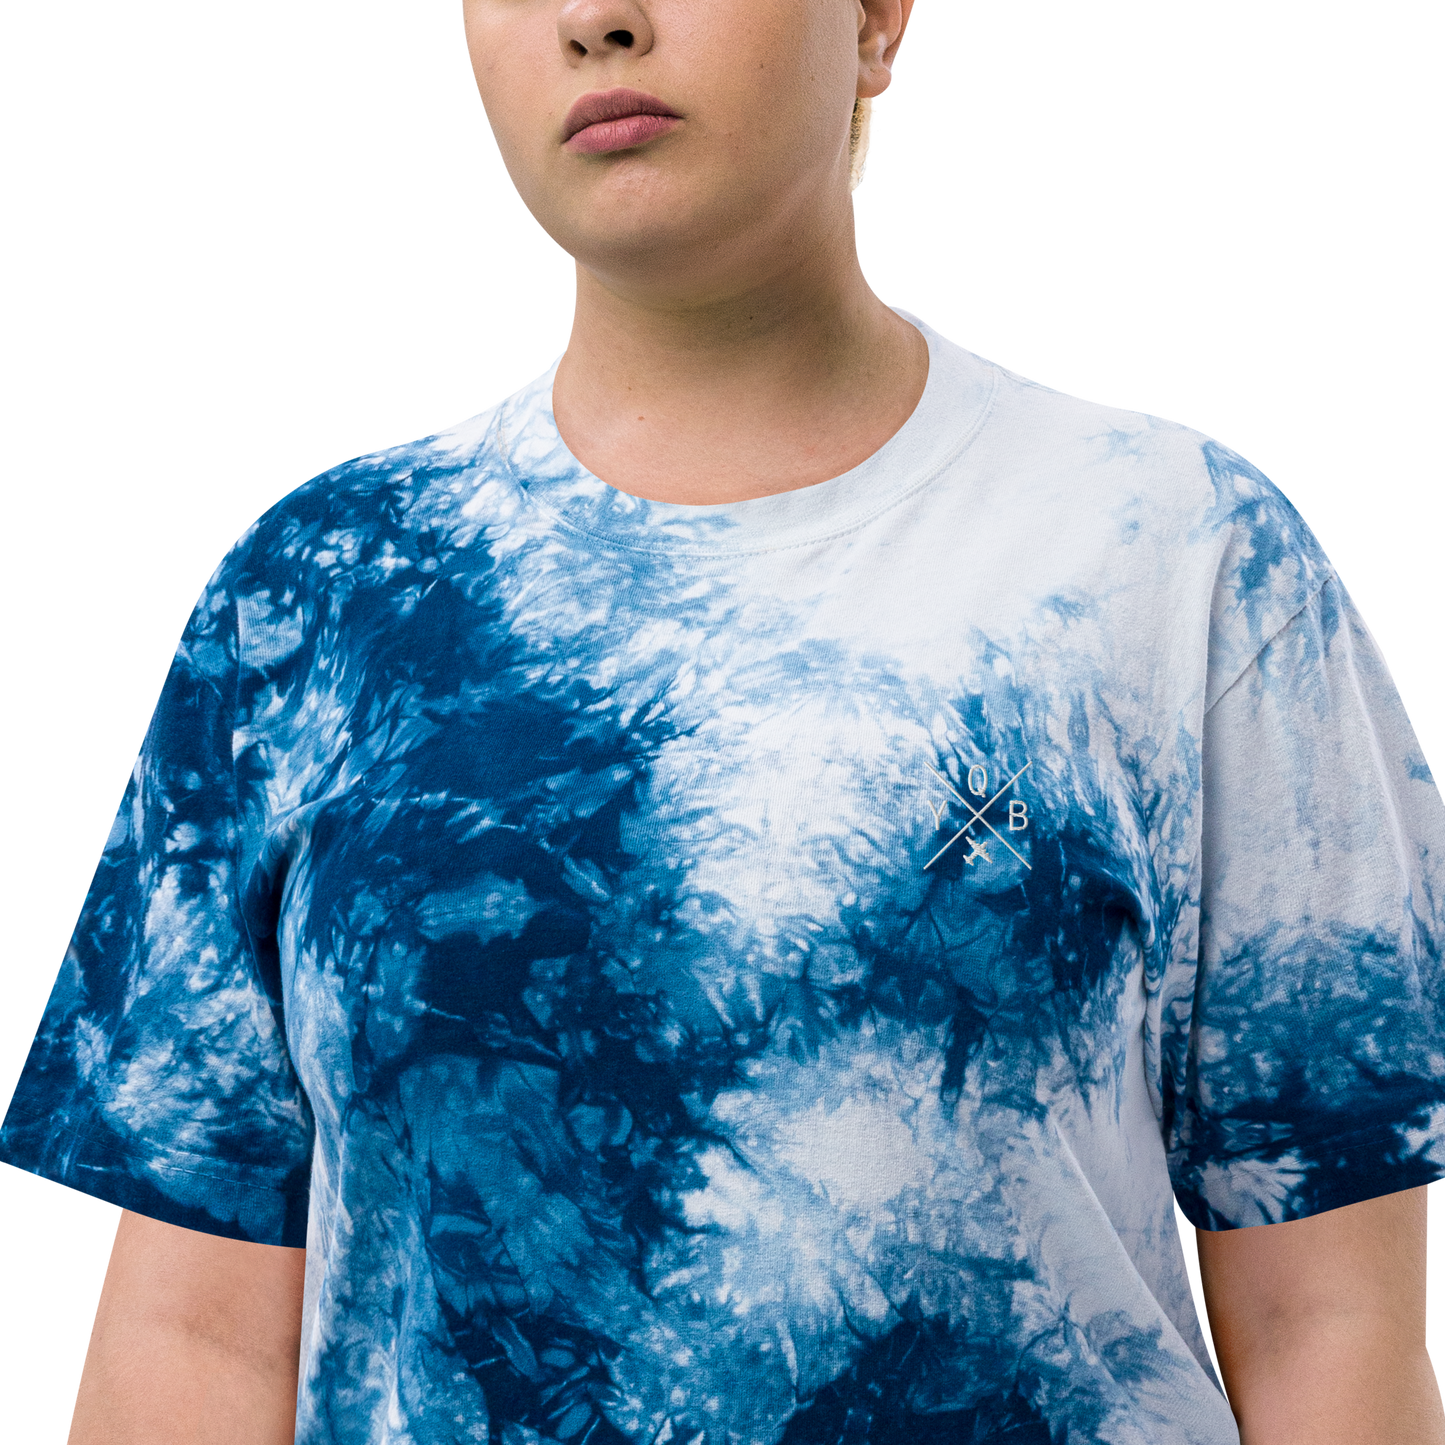 Crossed-X Oversized Tie-Dye T-Shirt • YQB Quebec City • YHM Designs - Image 10